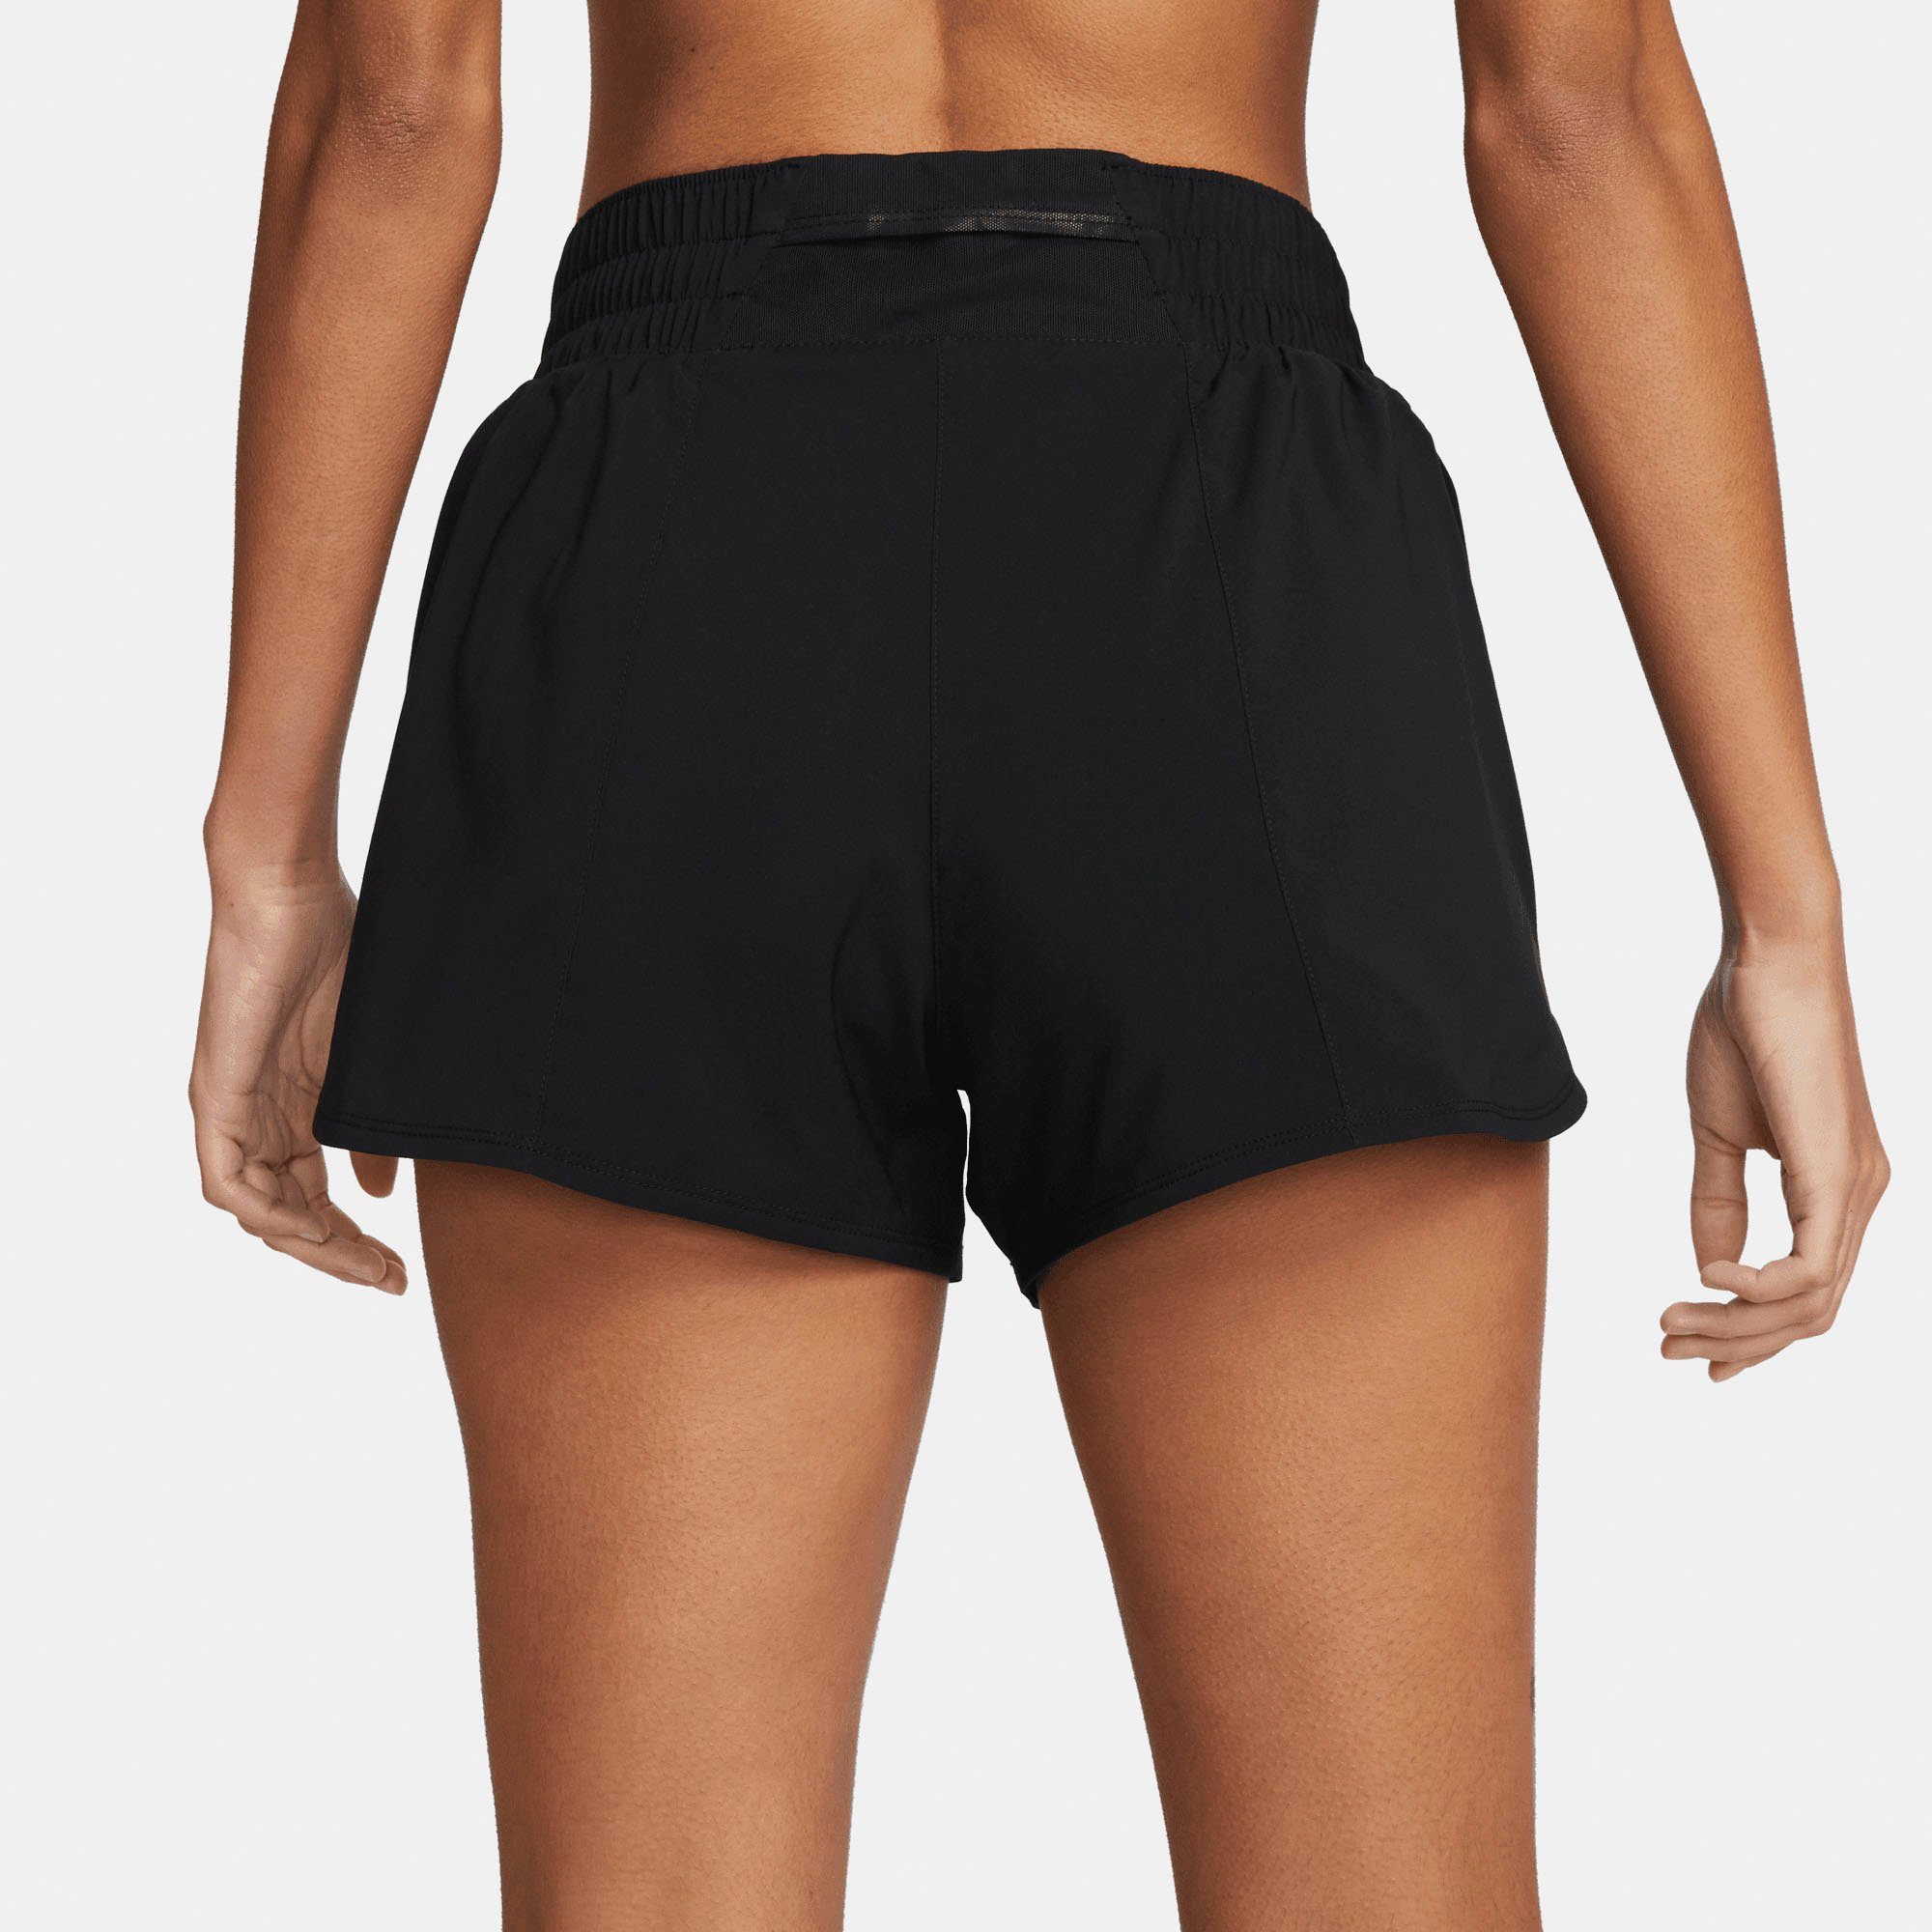 ONE Nike BLACK/REFLECTIVE DRI-FIT BRIEF-LINED SHORTS Trainingsshorts MID-RISE WOMEN'S SILV